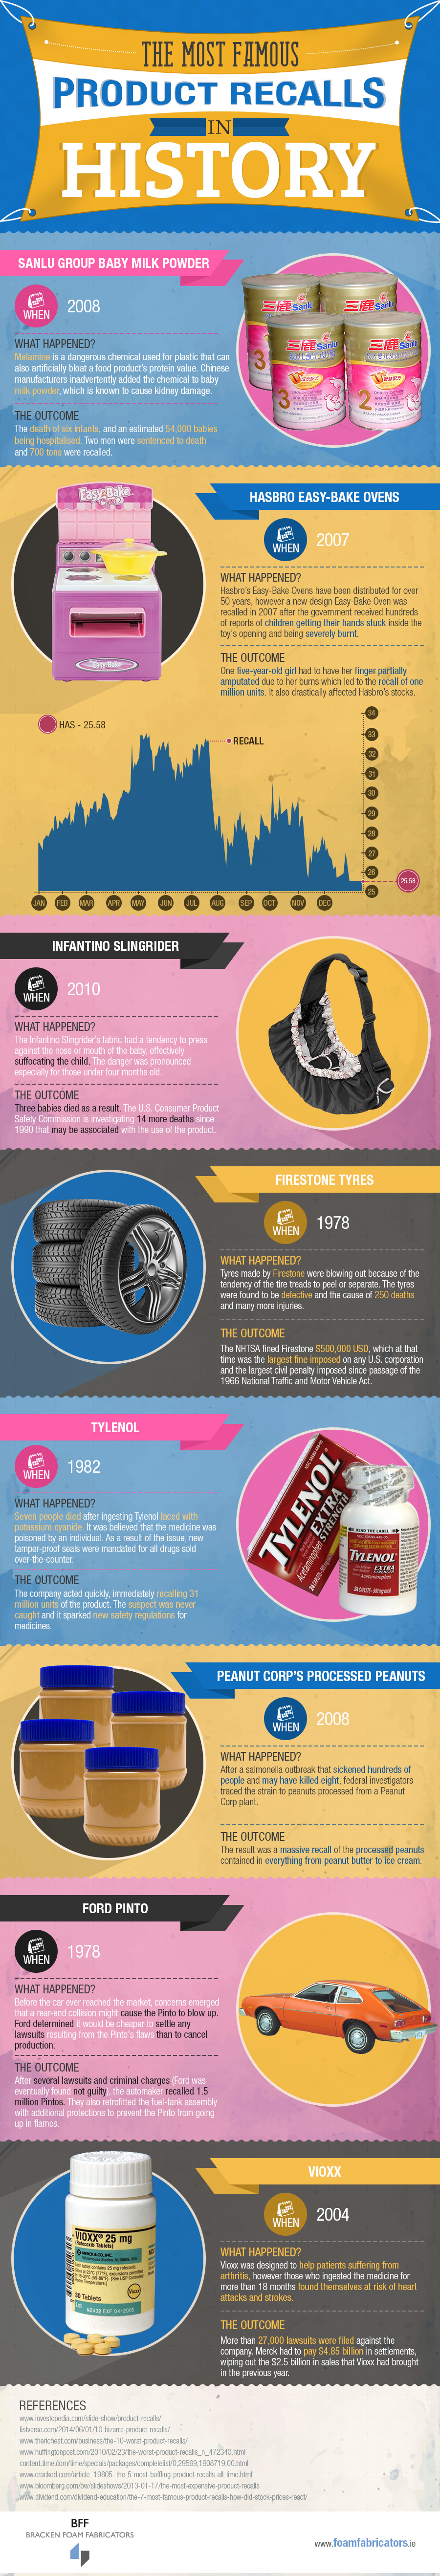 The Most Famous Product Recalls in History